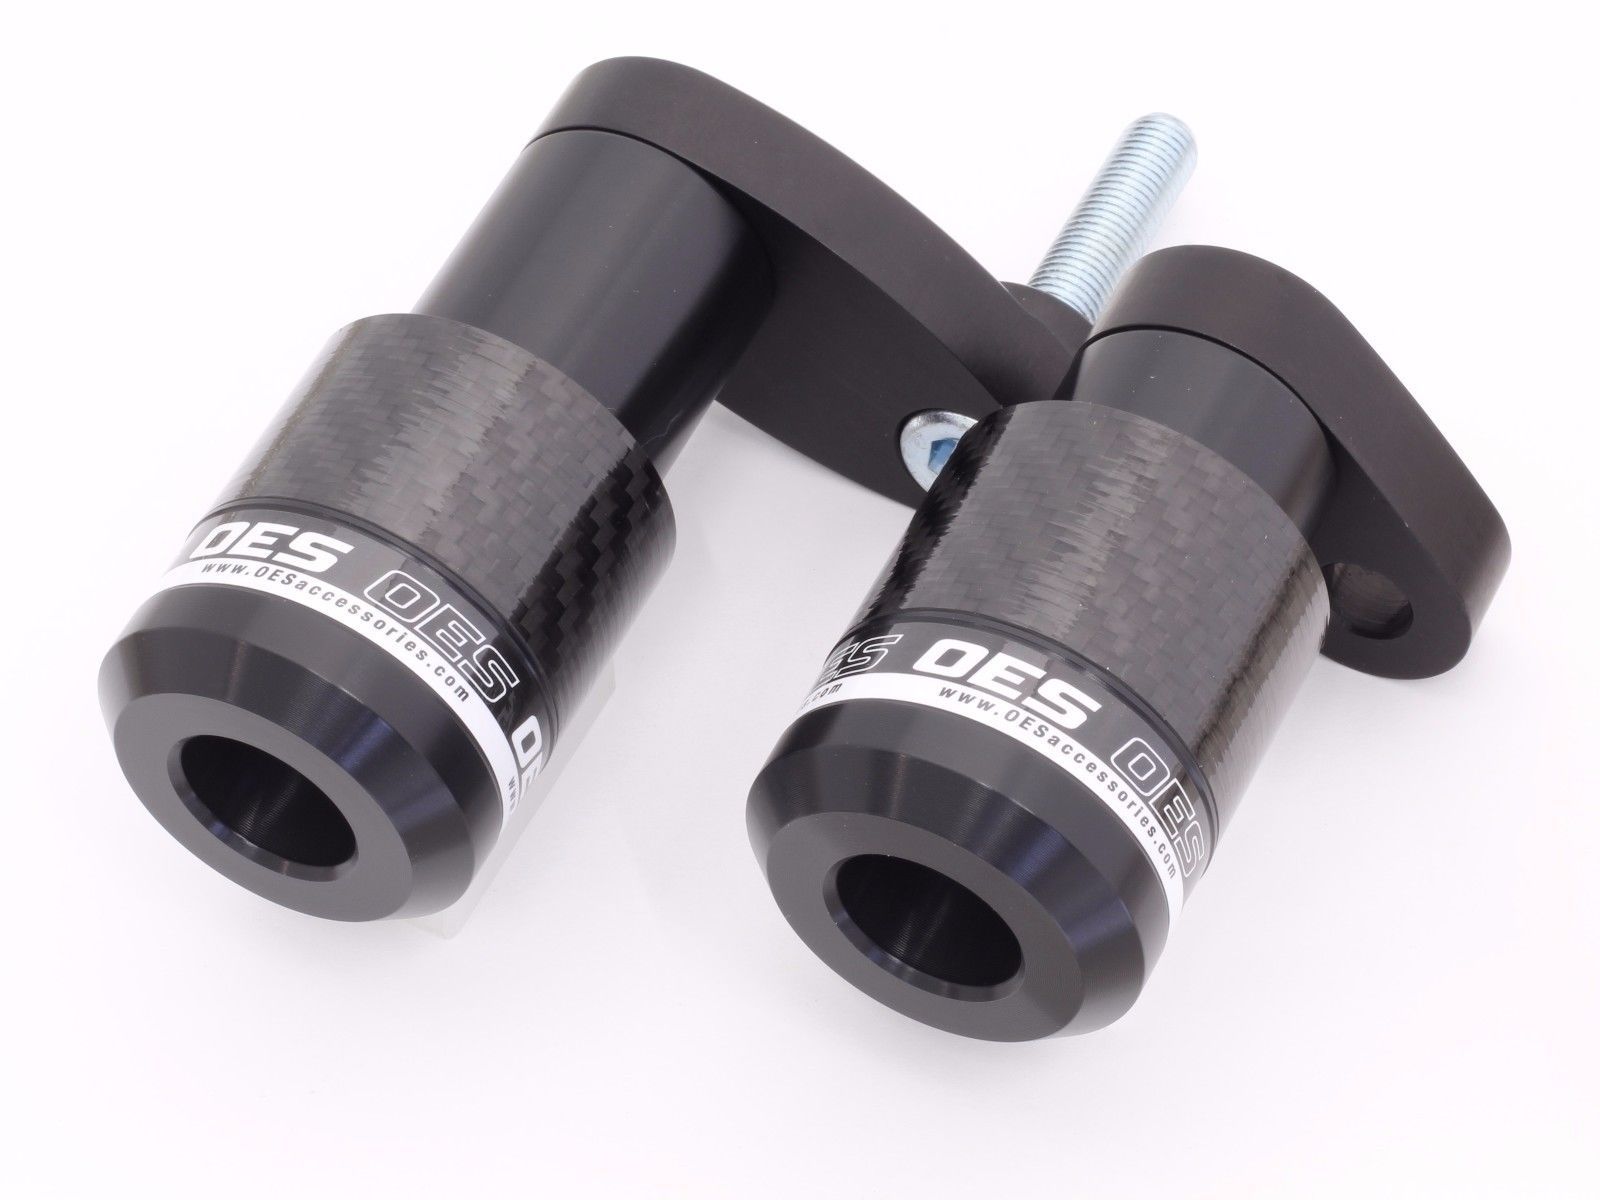 Primary image for OES Carbon Frame Sliders 2009 2010 2011 2012 Kawasaki Ninja ZX-6R ZX6R No Cut